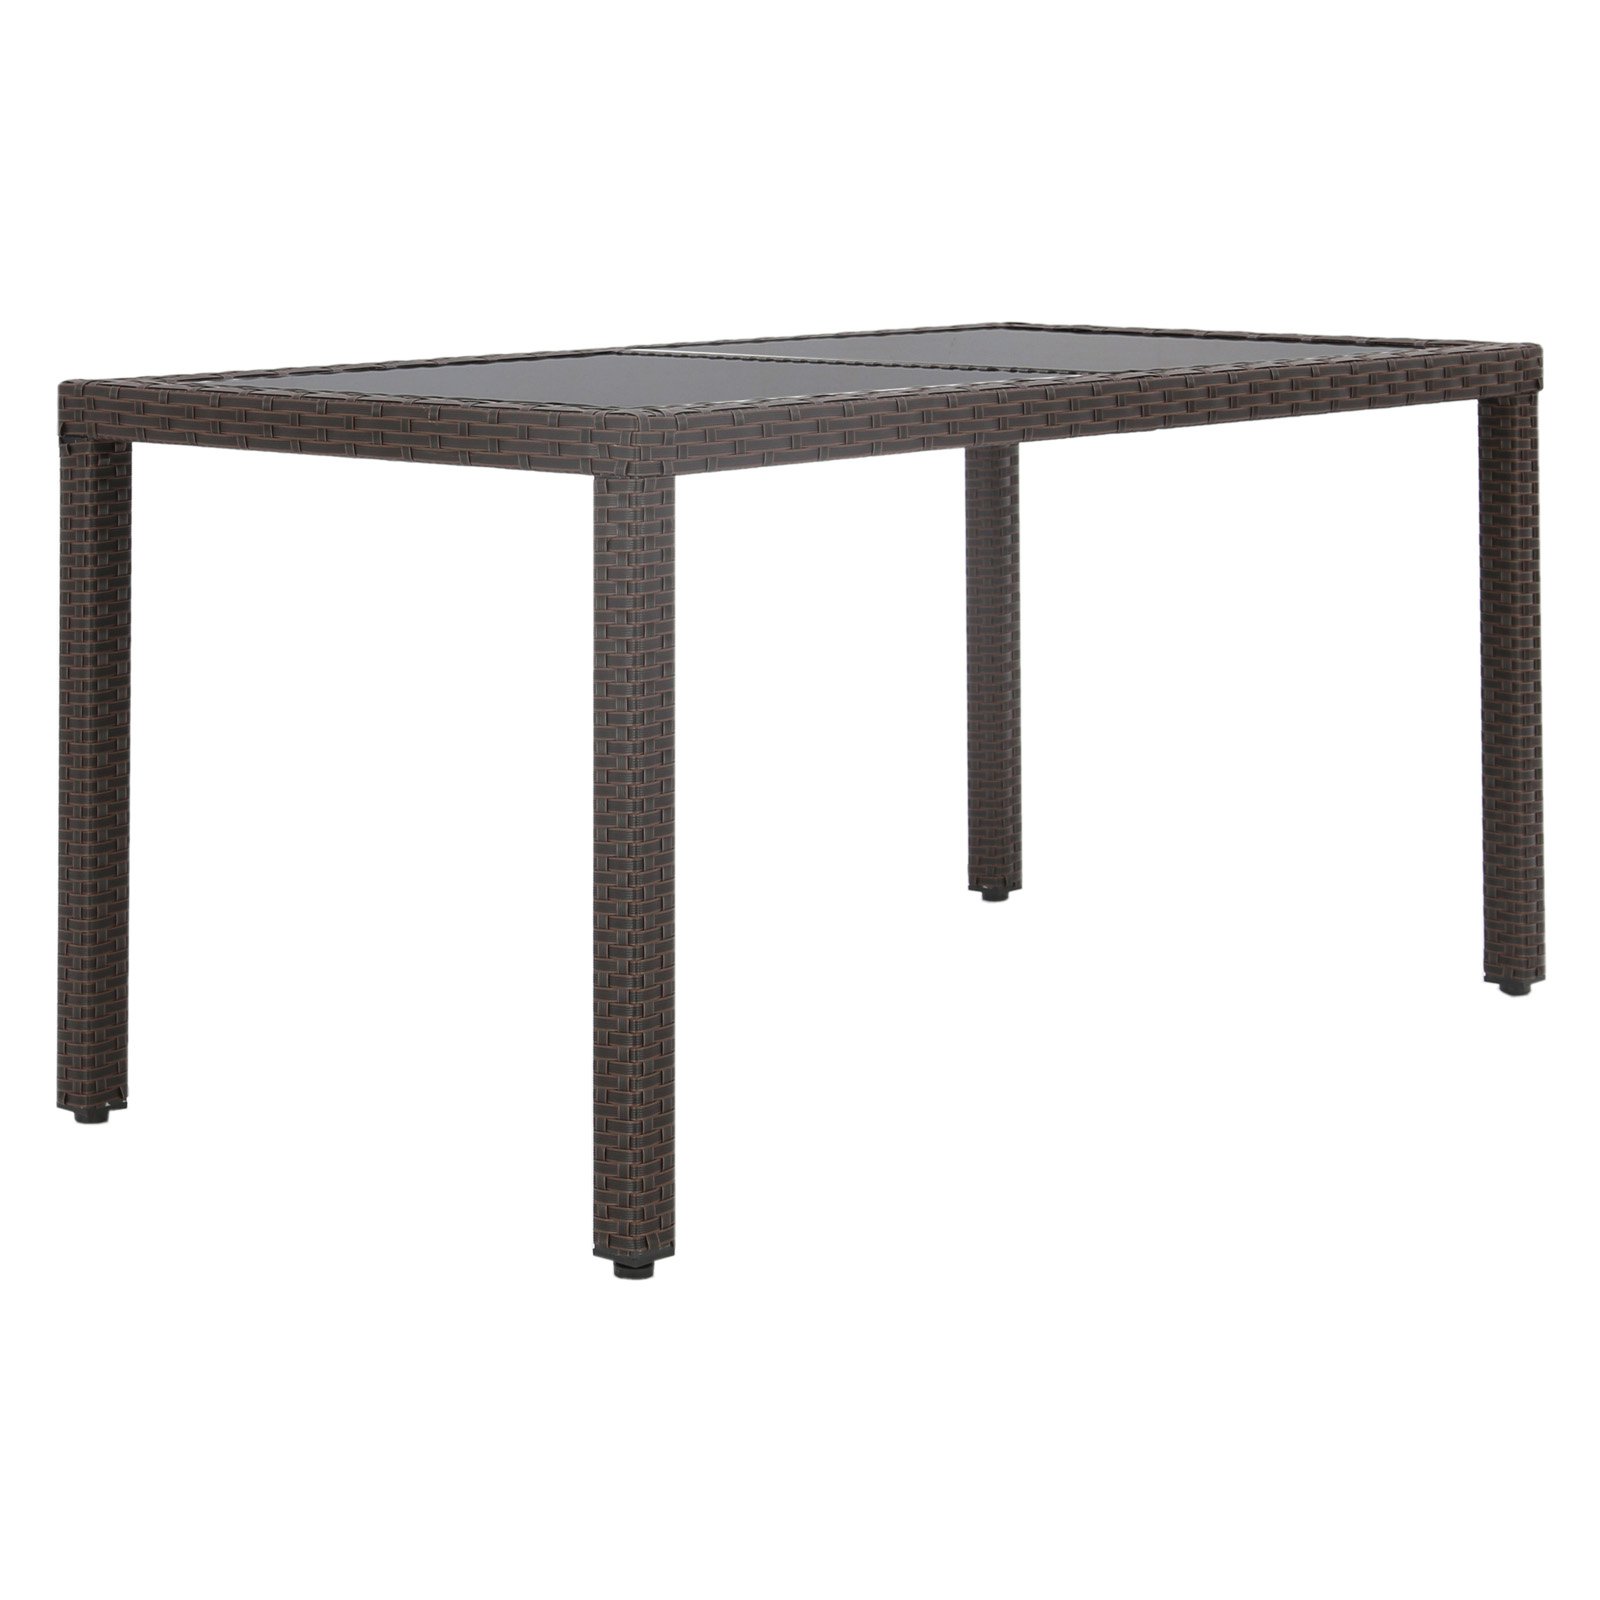 Baner Garden  Outdoor Patio Resin Wicker Steel Rectangle Dining Table Furniture, Chocolate - 57.1 x 30.3 x 28.5 in. - image 2 of 5